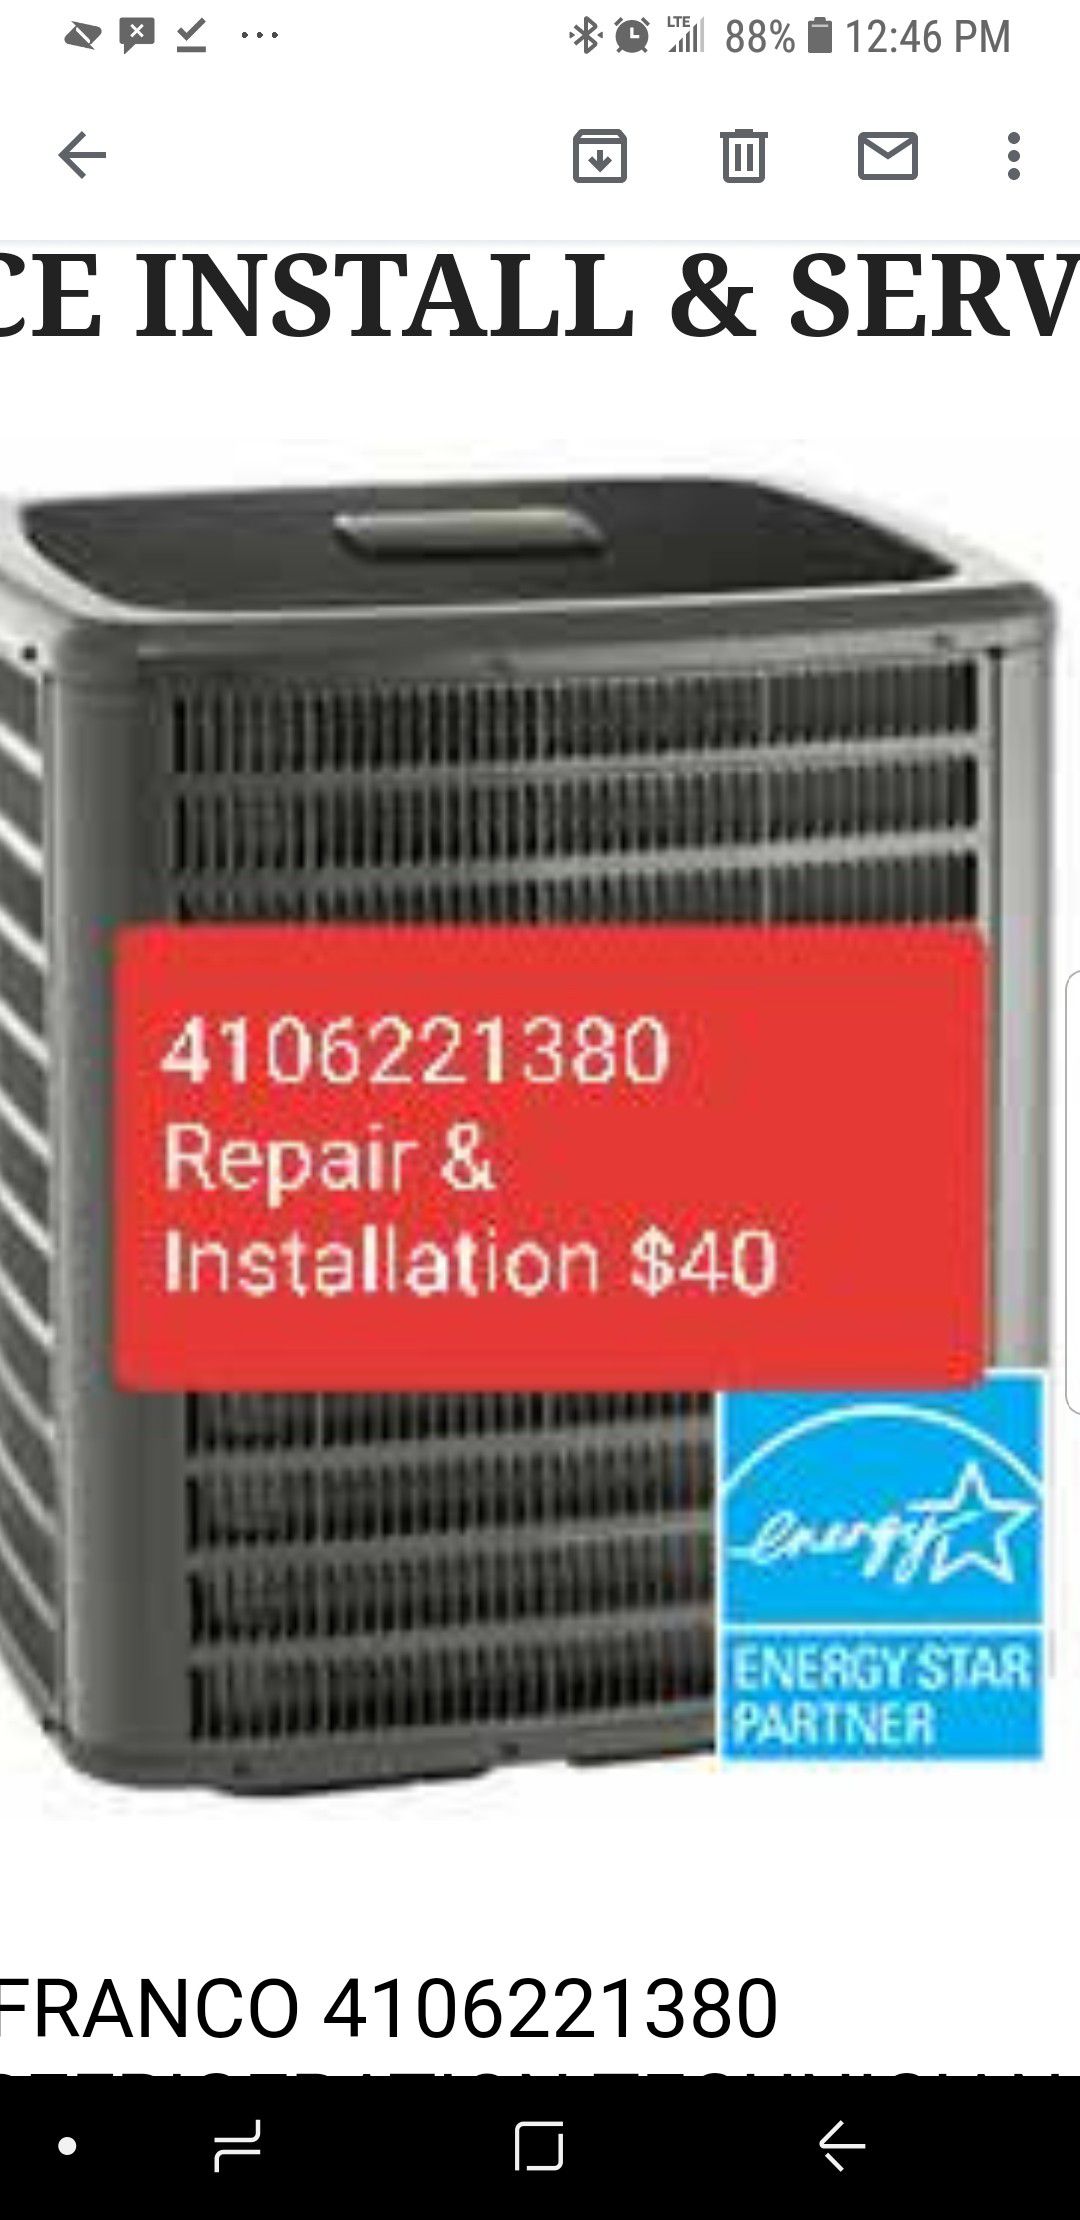 A/c, air conditioning & refrigeration